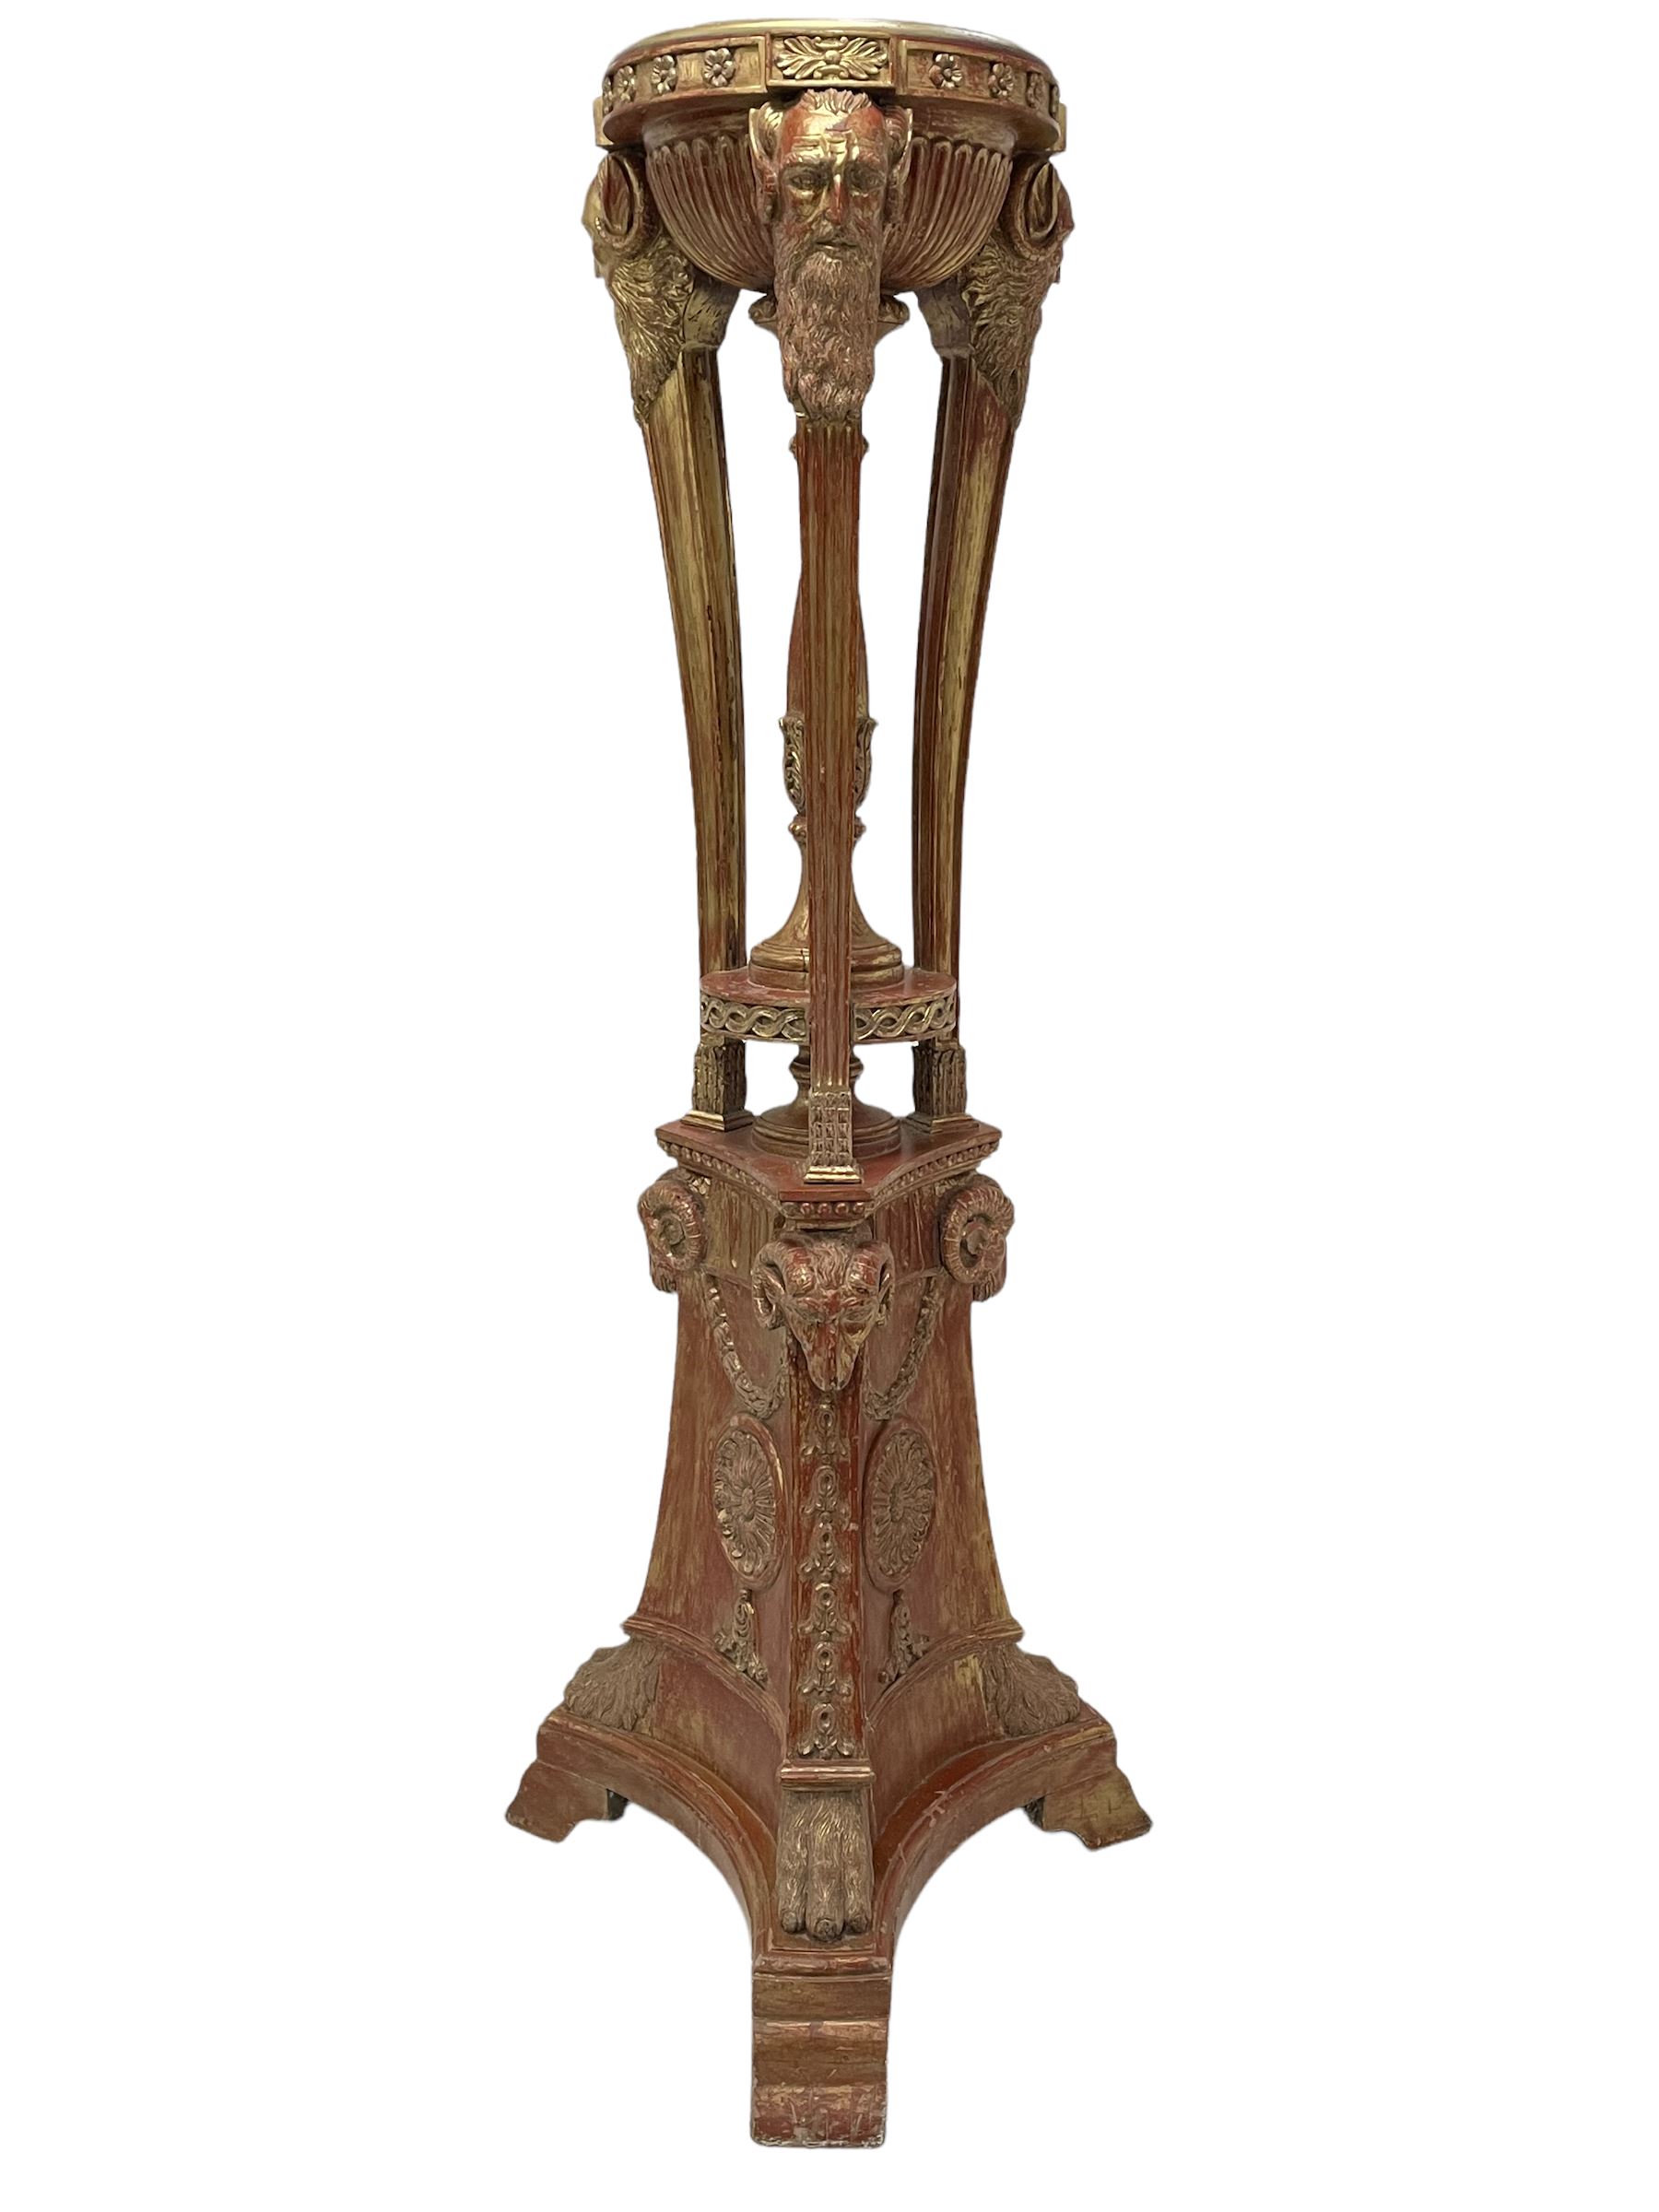 Late 20th century carved beech torchere or floor lamp in the manner of Adams